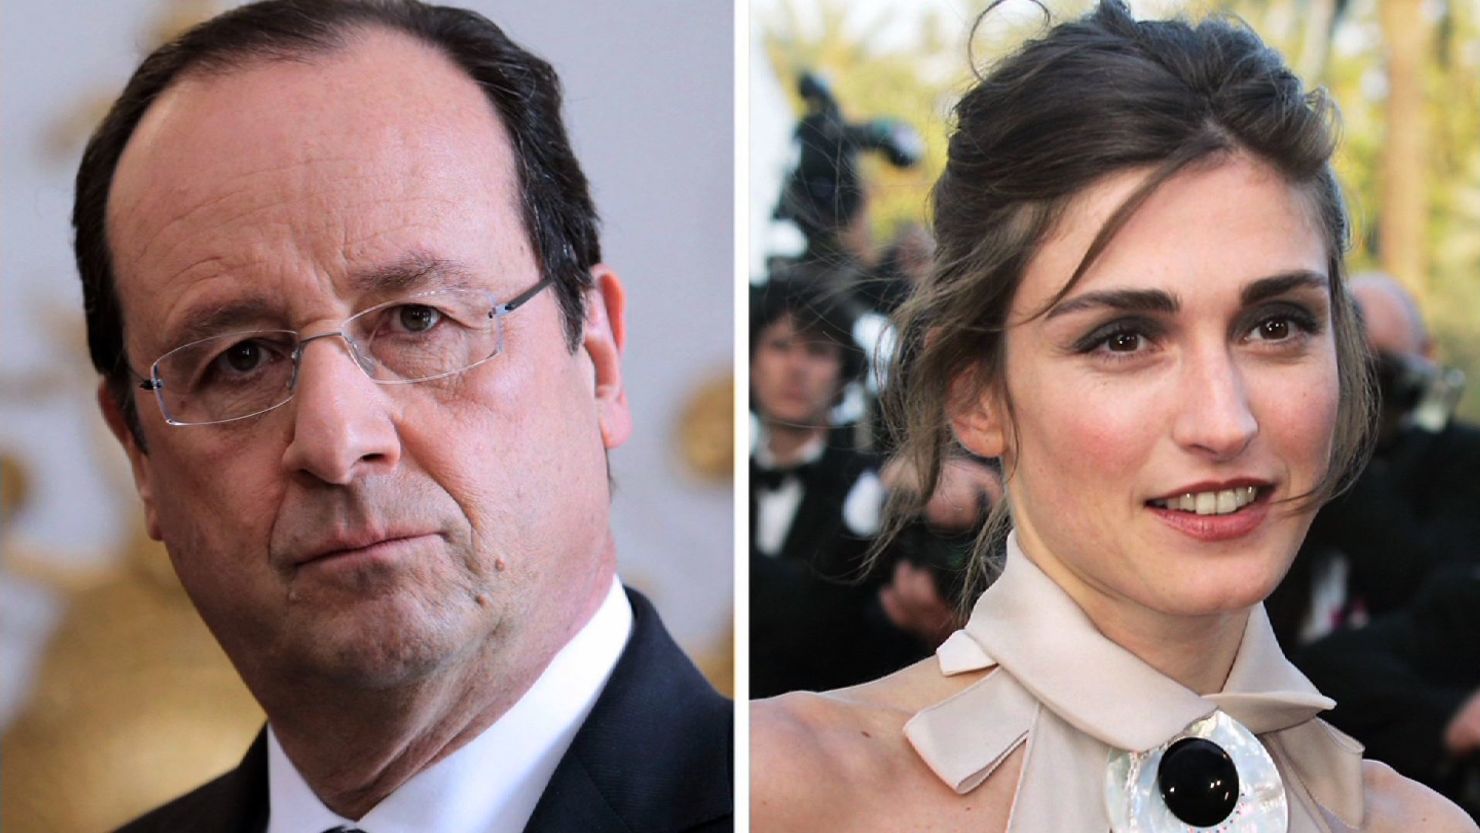 French President Francois Hollande and French actress Julie Gayet.